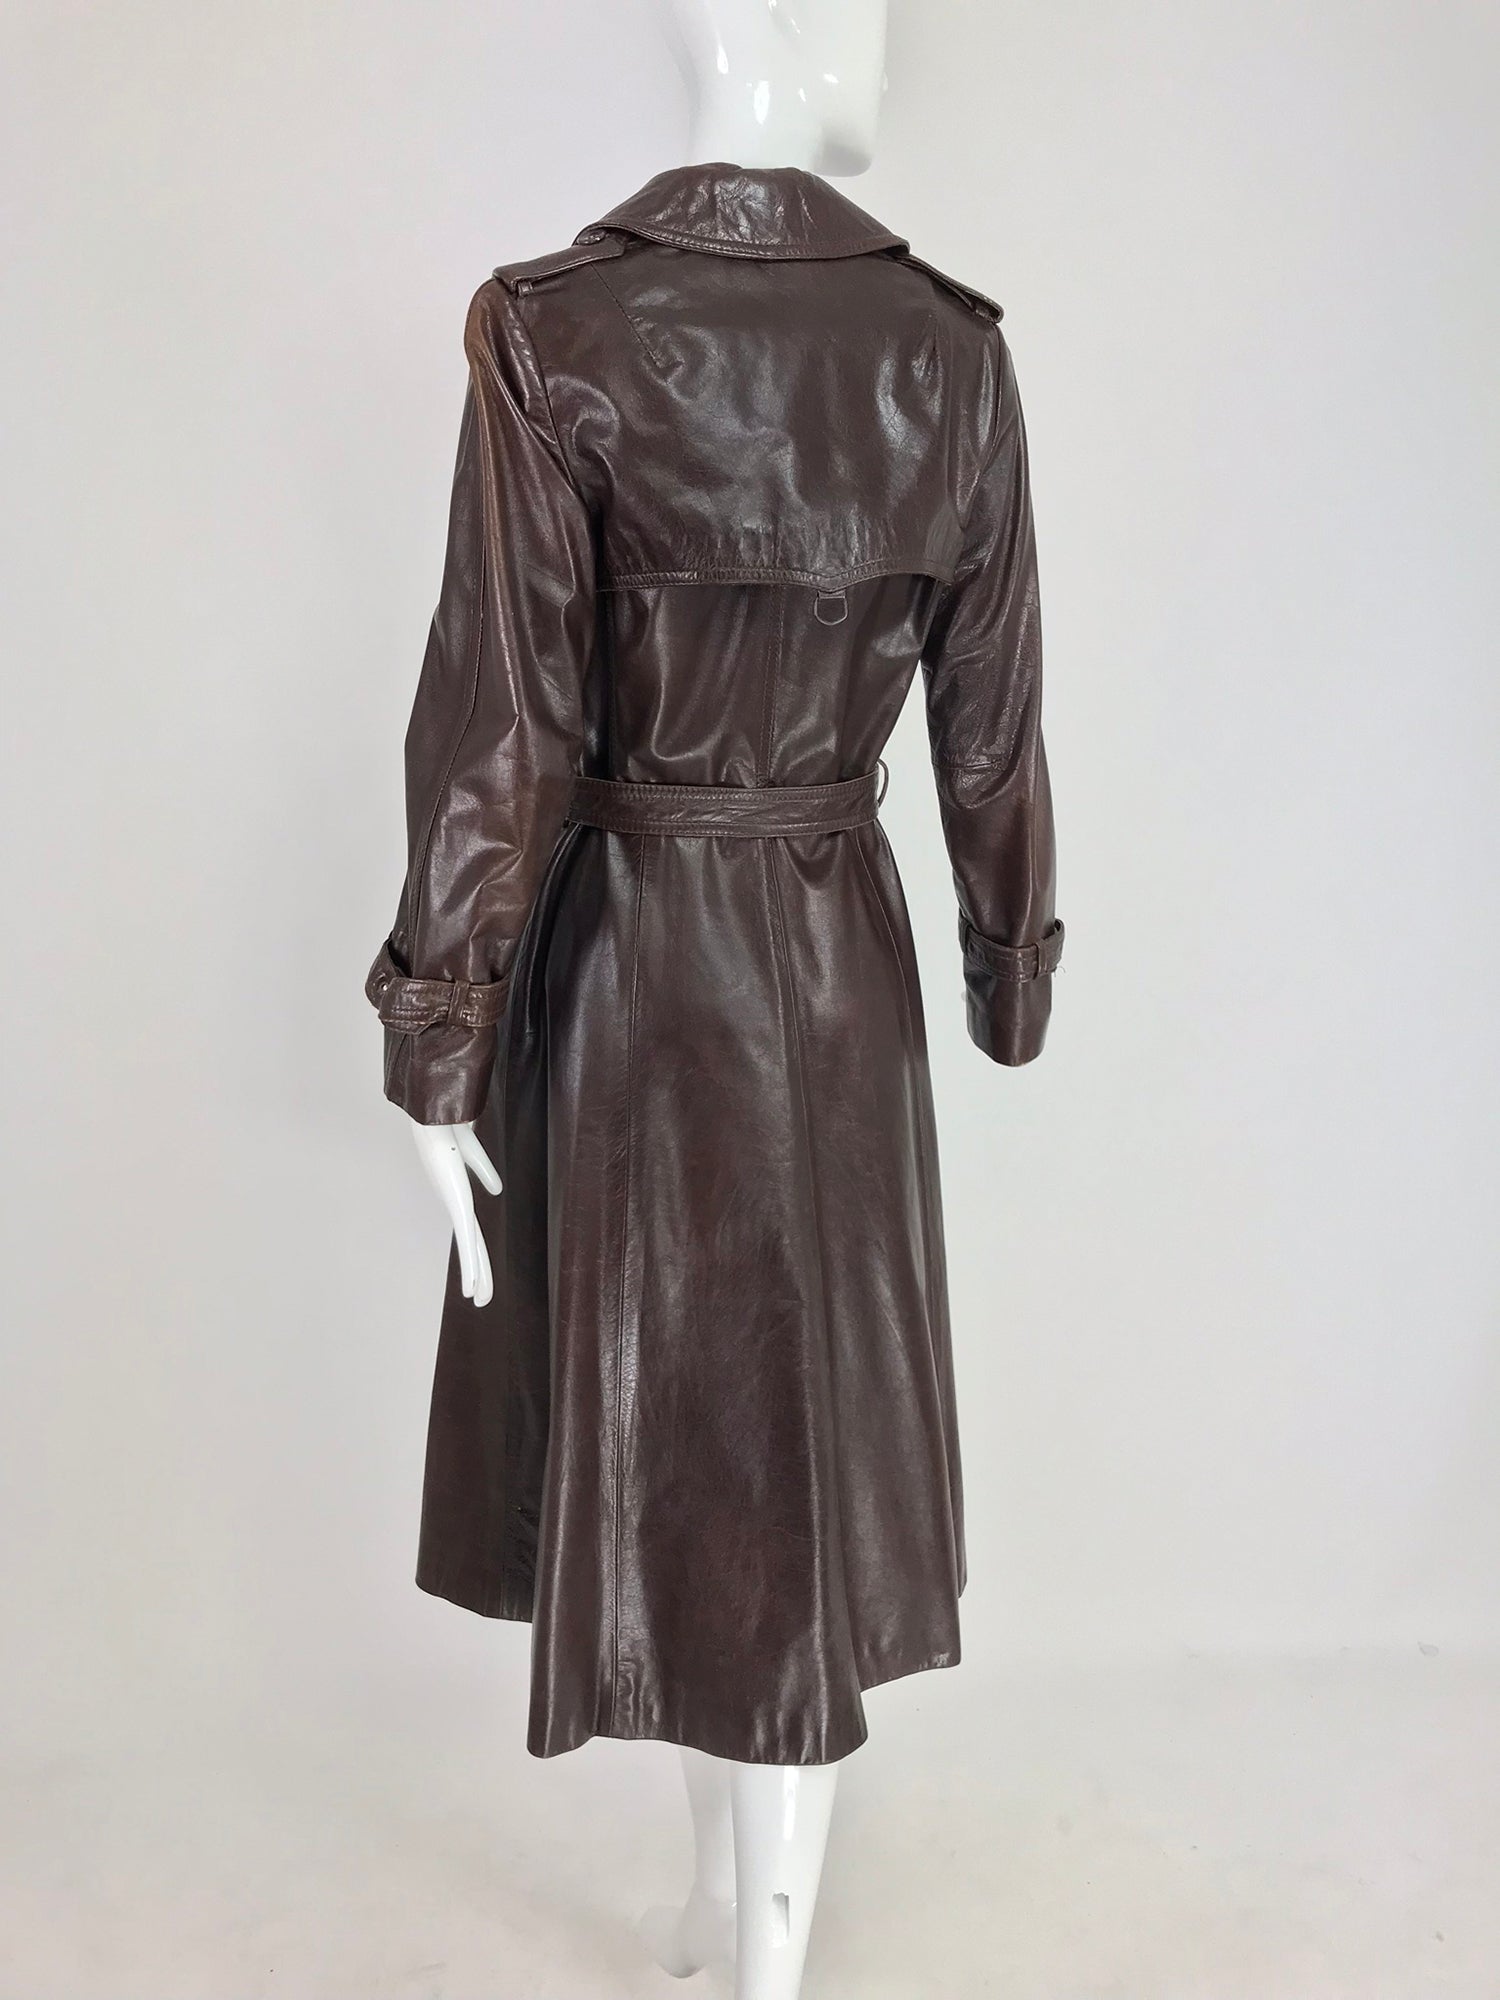 Anne Klein Chocolate brown leather trench coat 1970s – Palm Beach Vintage